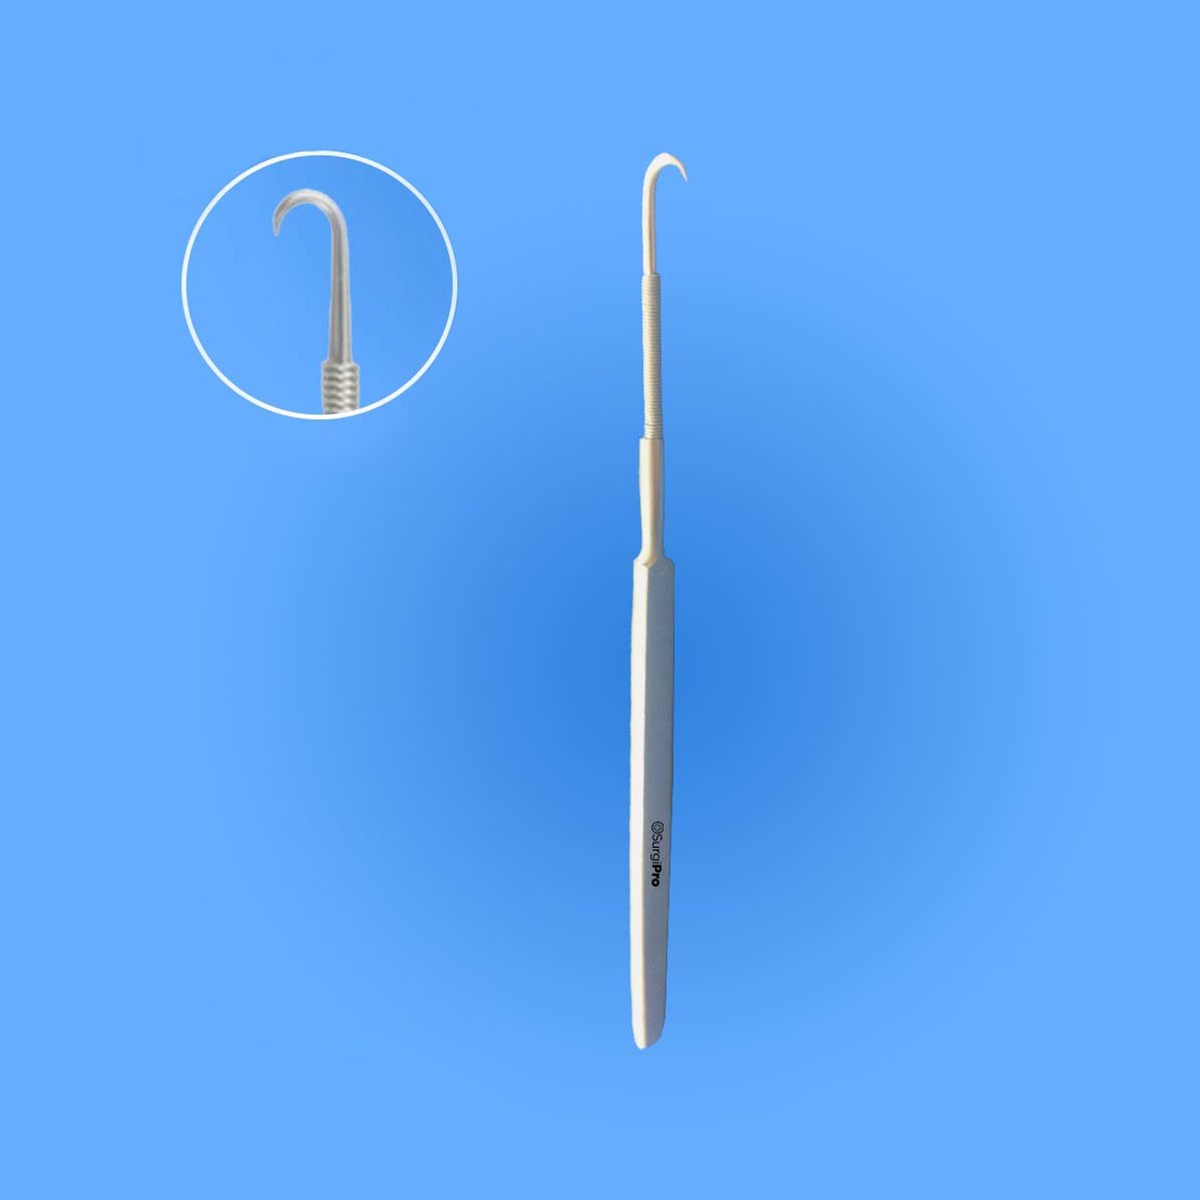 Best Practices for Maintenance and Care of Tracheal Instruments